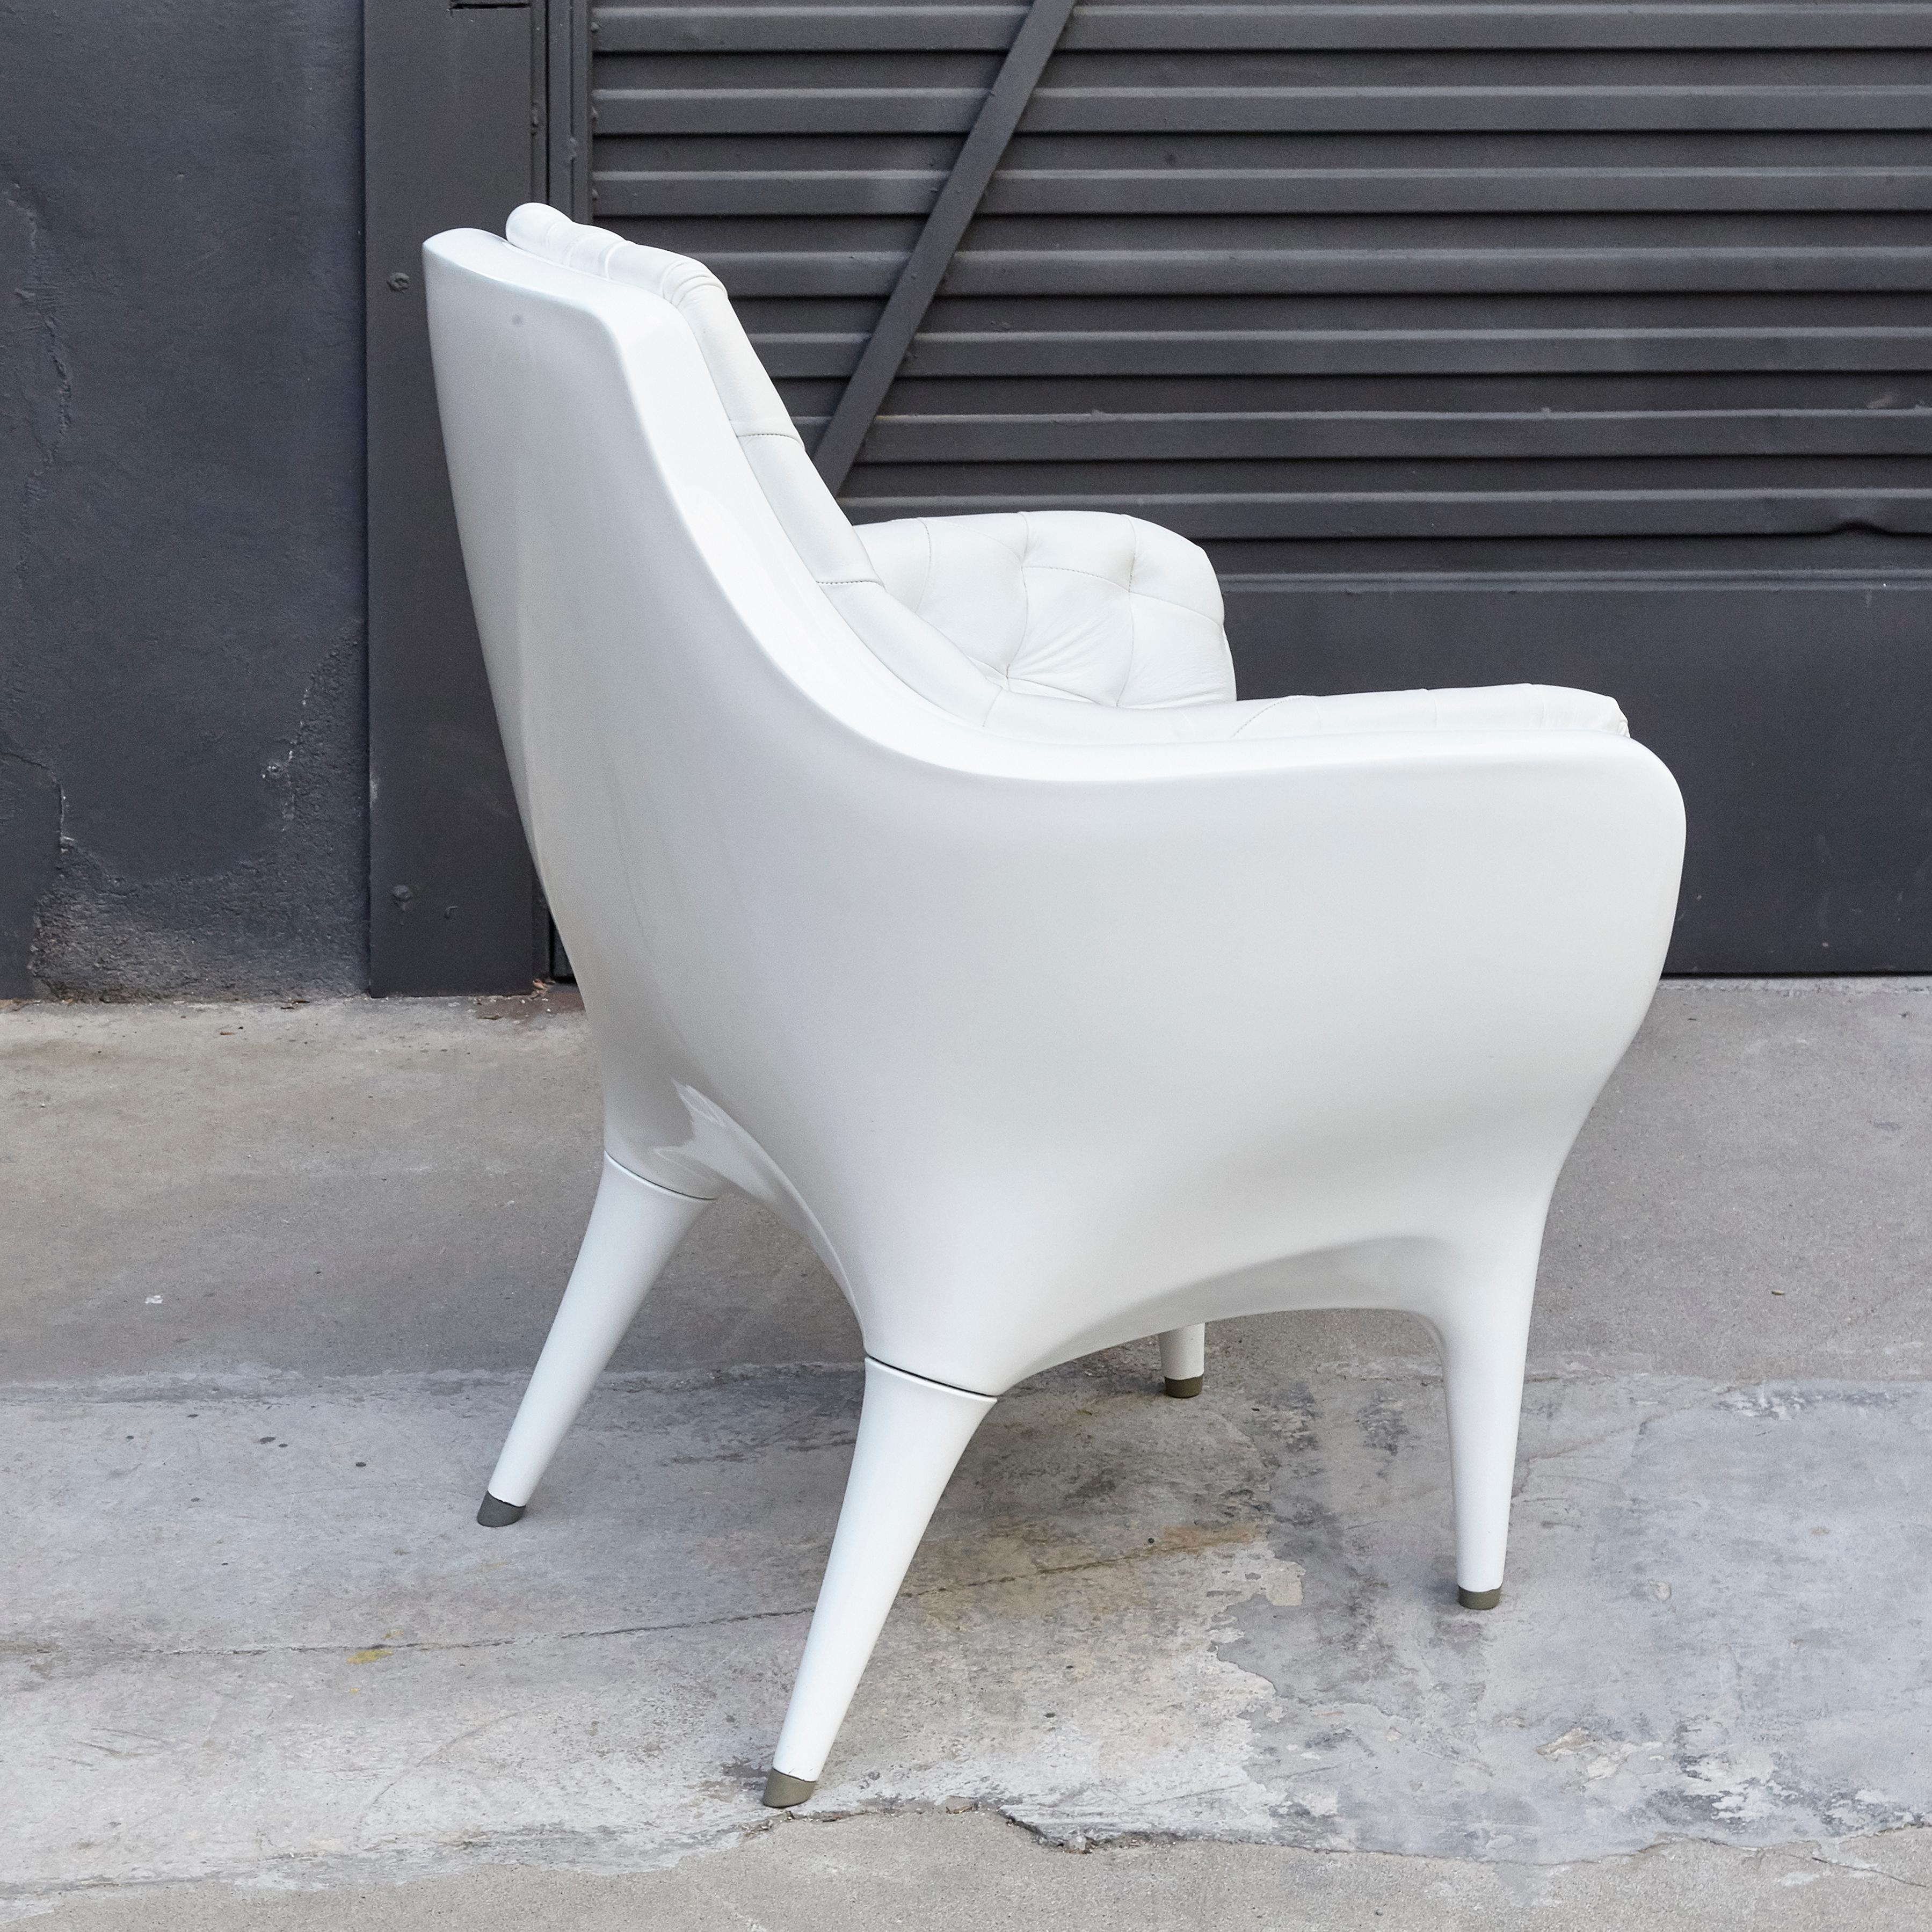 White Jaime Hayon Contemporary Showtime Armchair Lacquered 1